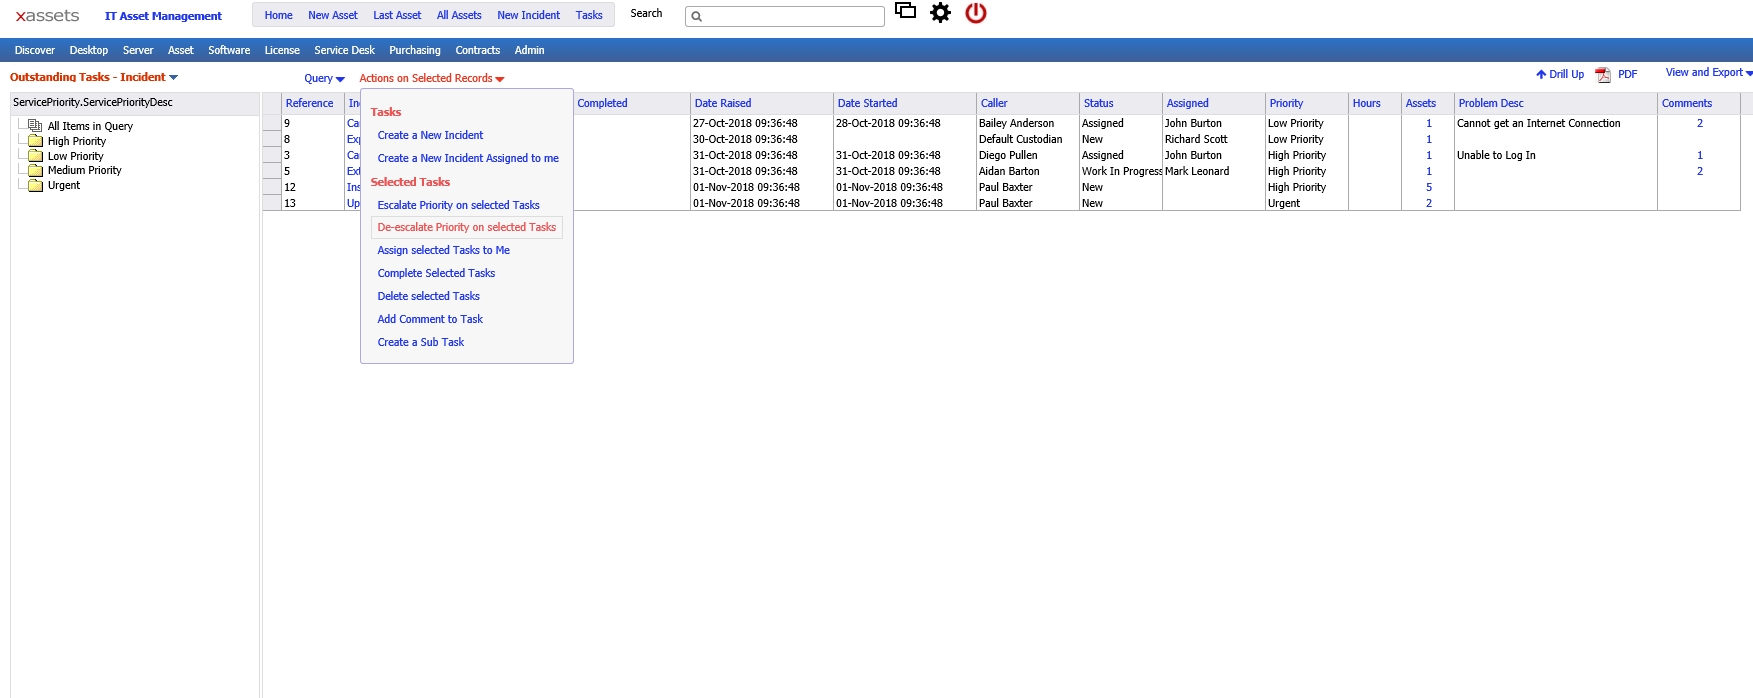 Screenshot from the xAssets product suite